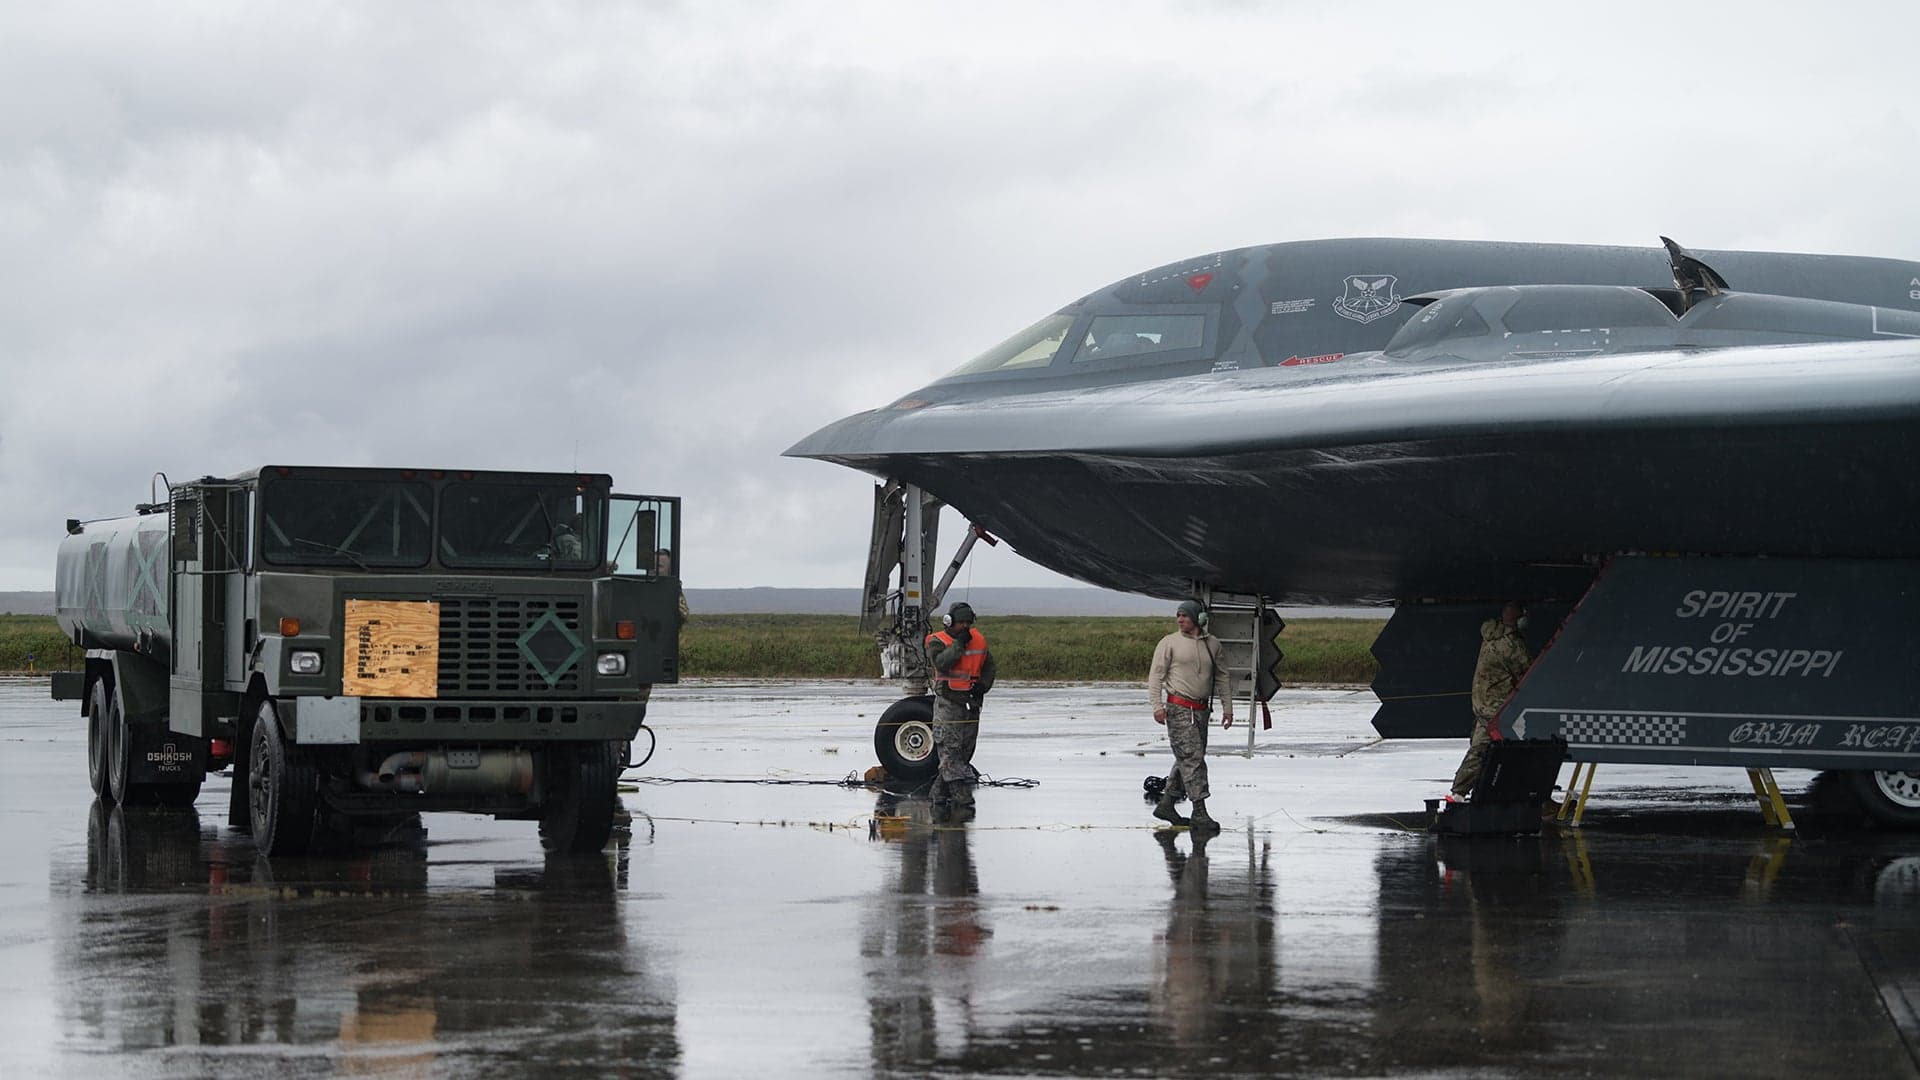 B-2 Stealth Bomber Has Made Its First-Ever Visit To Increasingly Strategic Iceland (Updated)